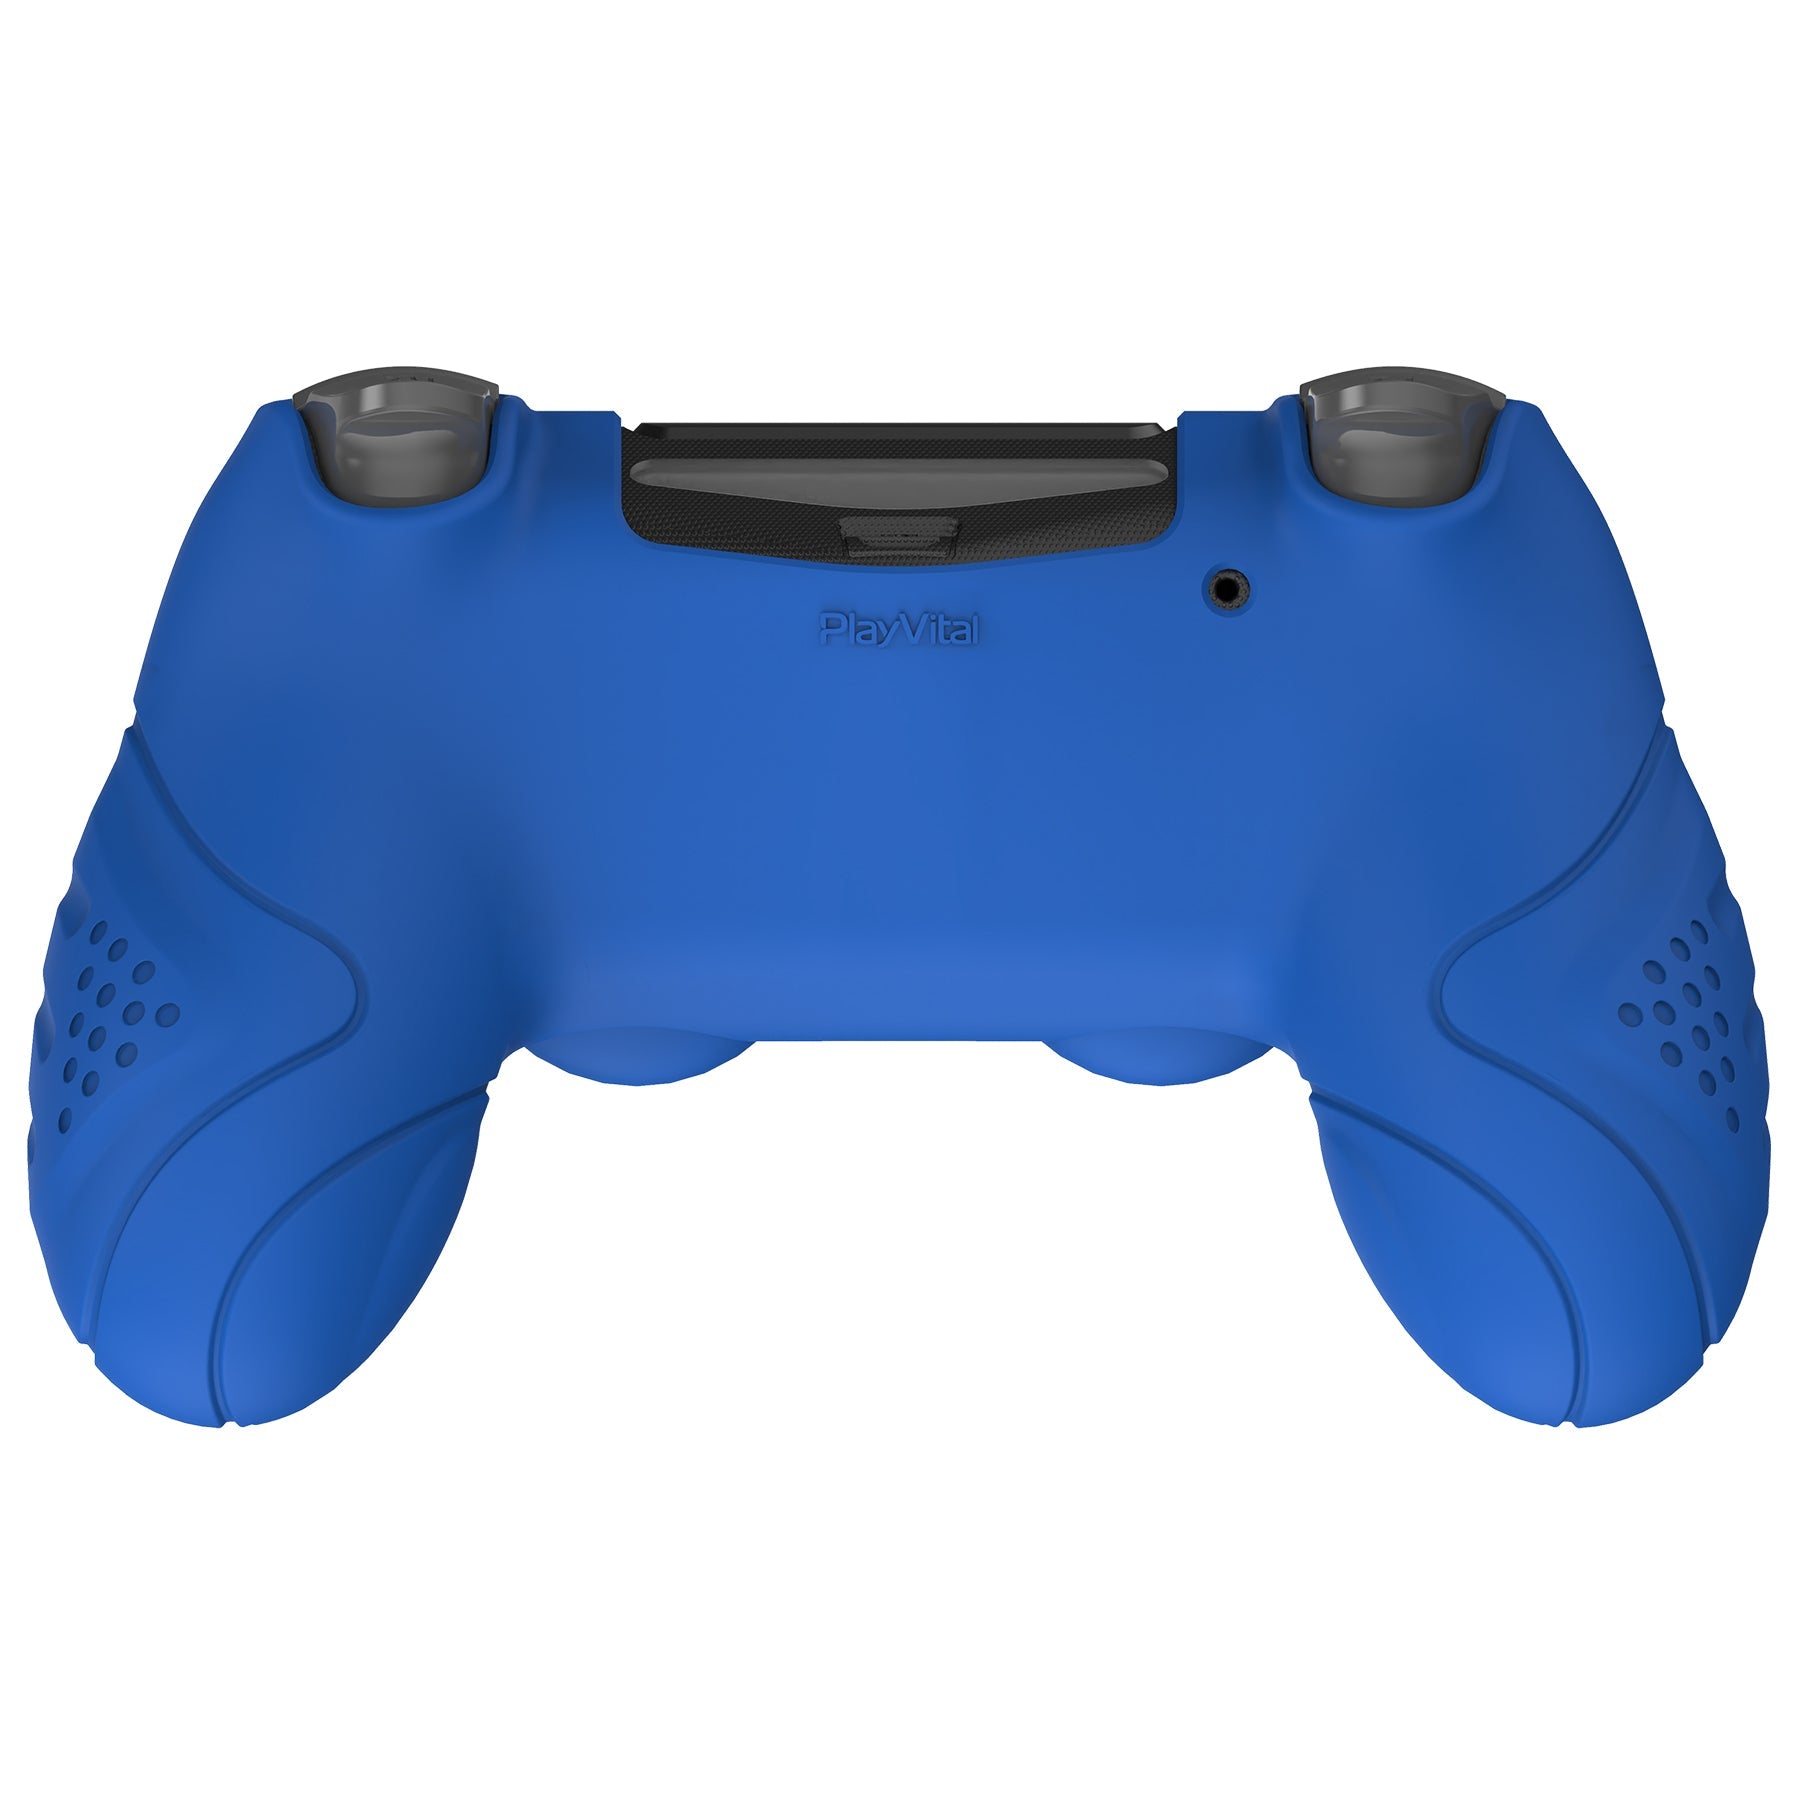 PlayVital Guardian Edition Silicone Cover Skin with Thumb Grip Caps for PS4  Slim Pro Controller - Blue - P4CC0064